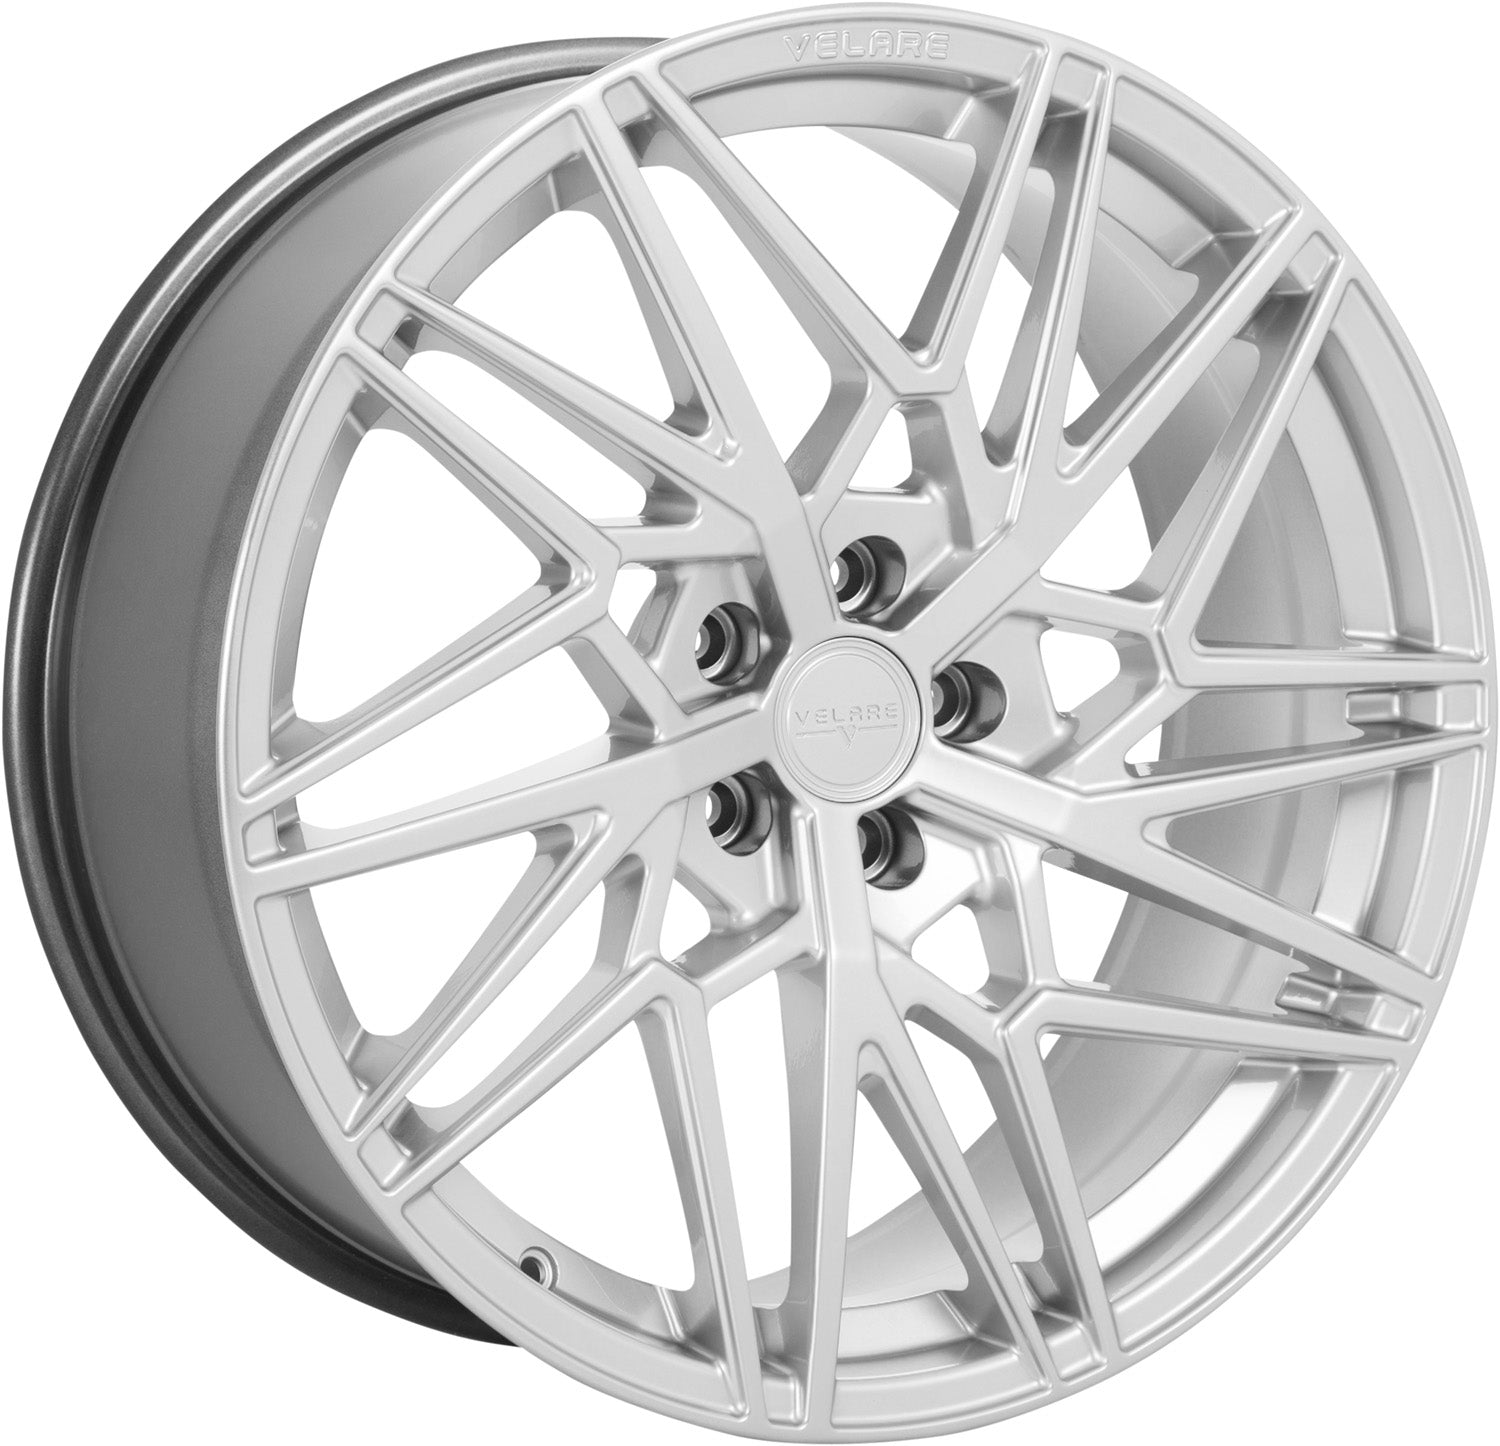 VLR06  Wheel and Tyre Package